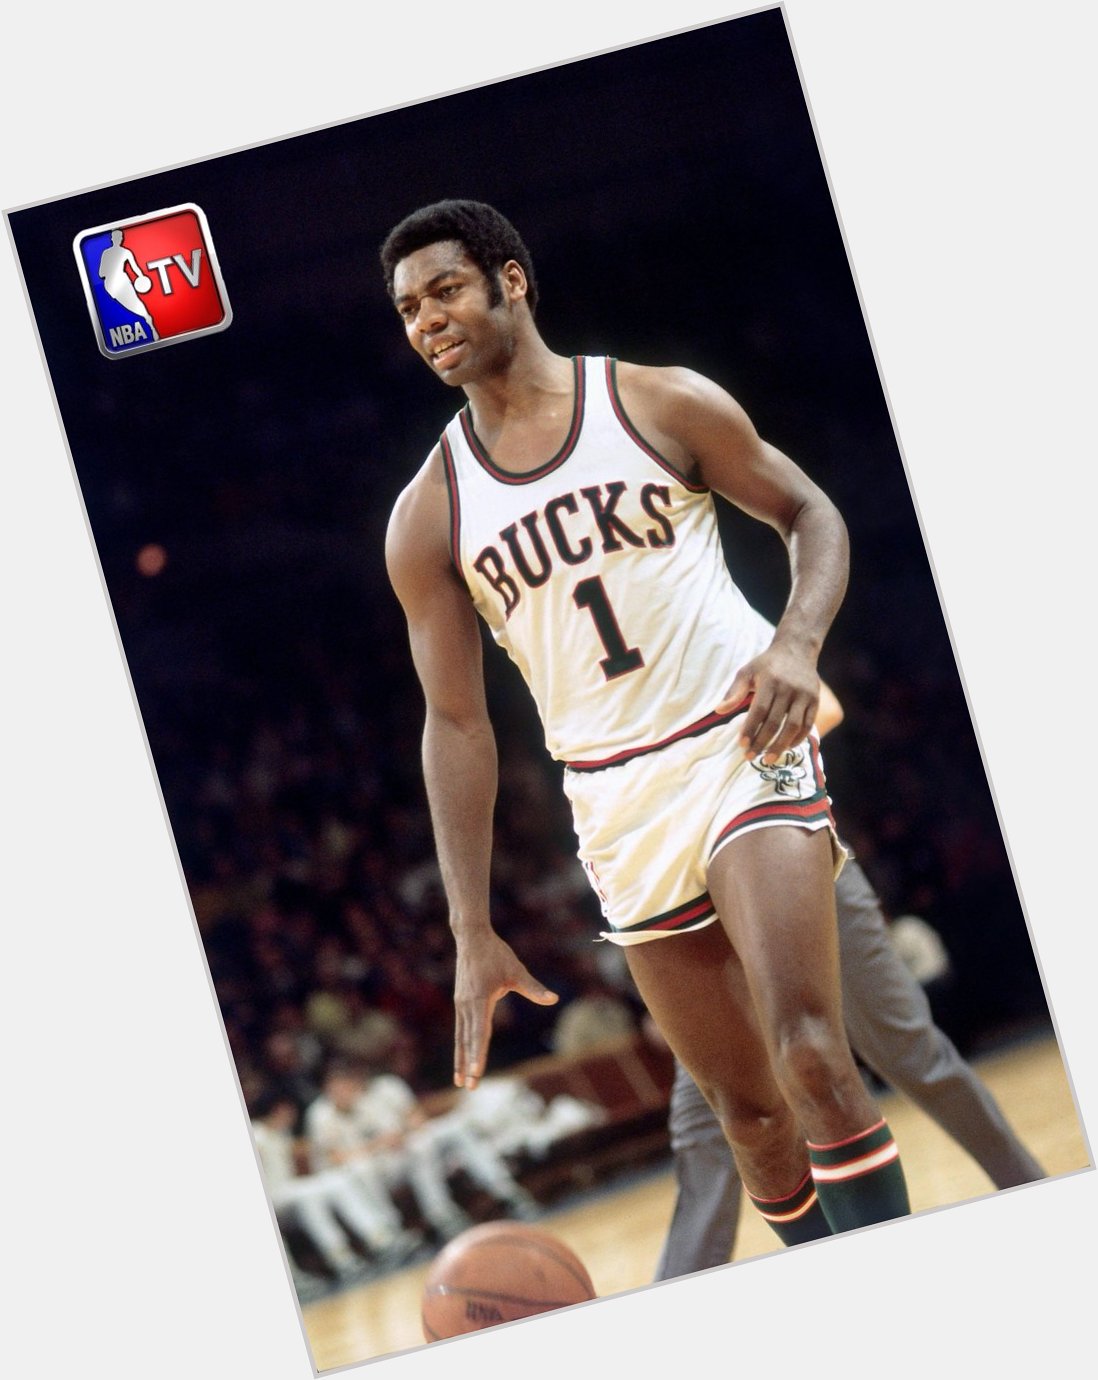 Happy Birthday to Oscar Robertson! "The Big O" recorded 189 career triple-doubles, most in NBA history 